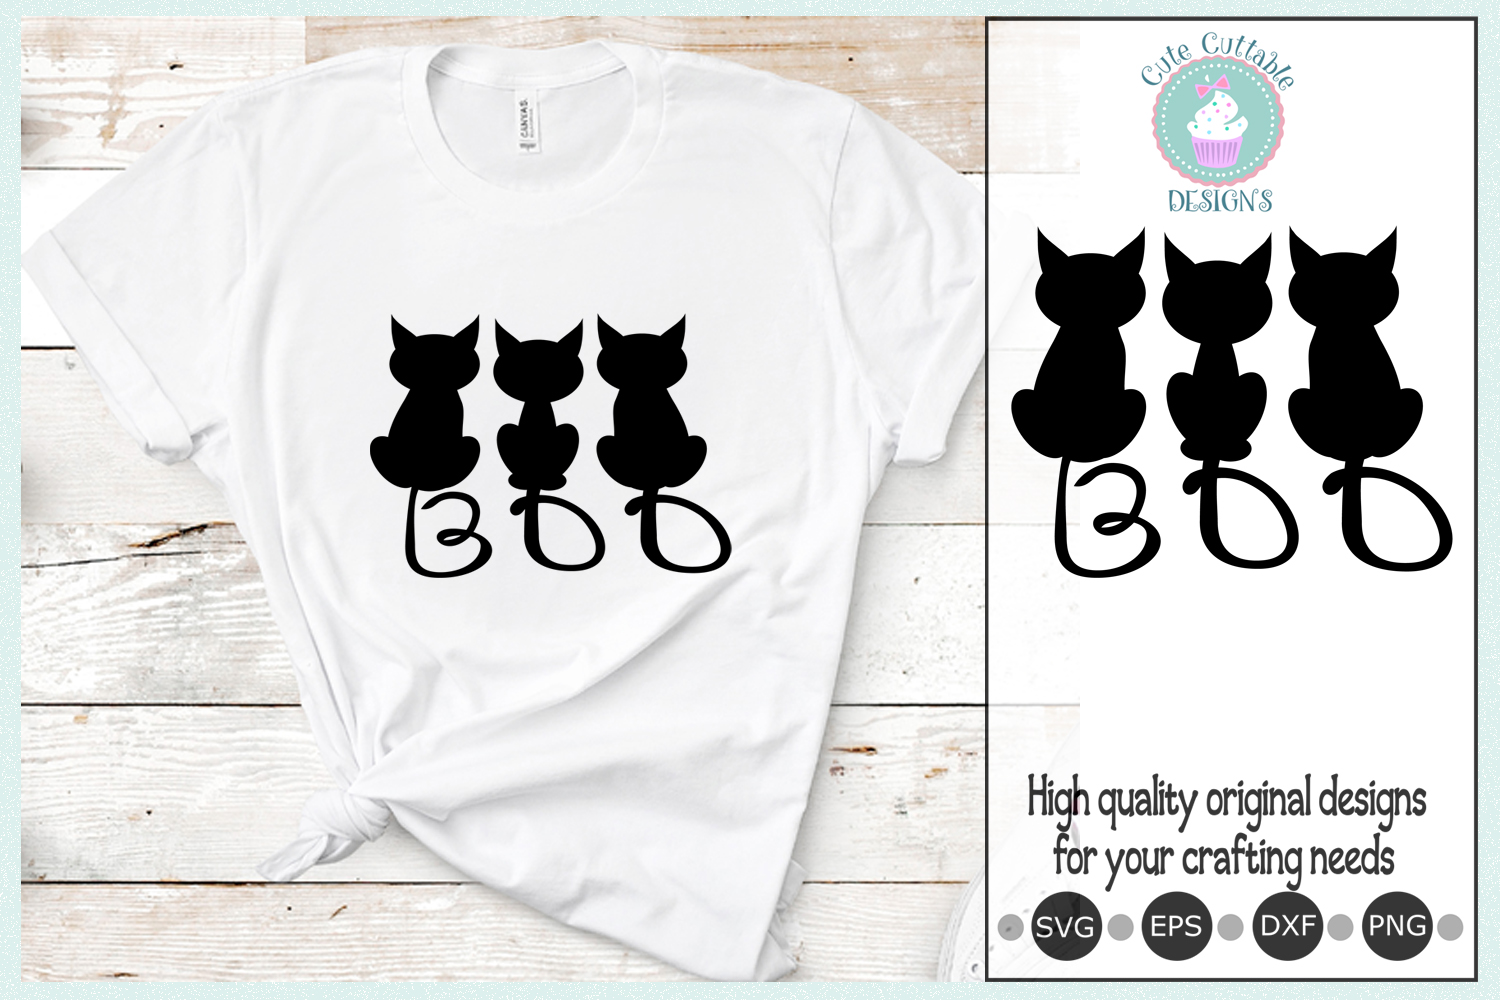 Boo SVG Black Cat svg Halloween saying, cat tail svg png